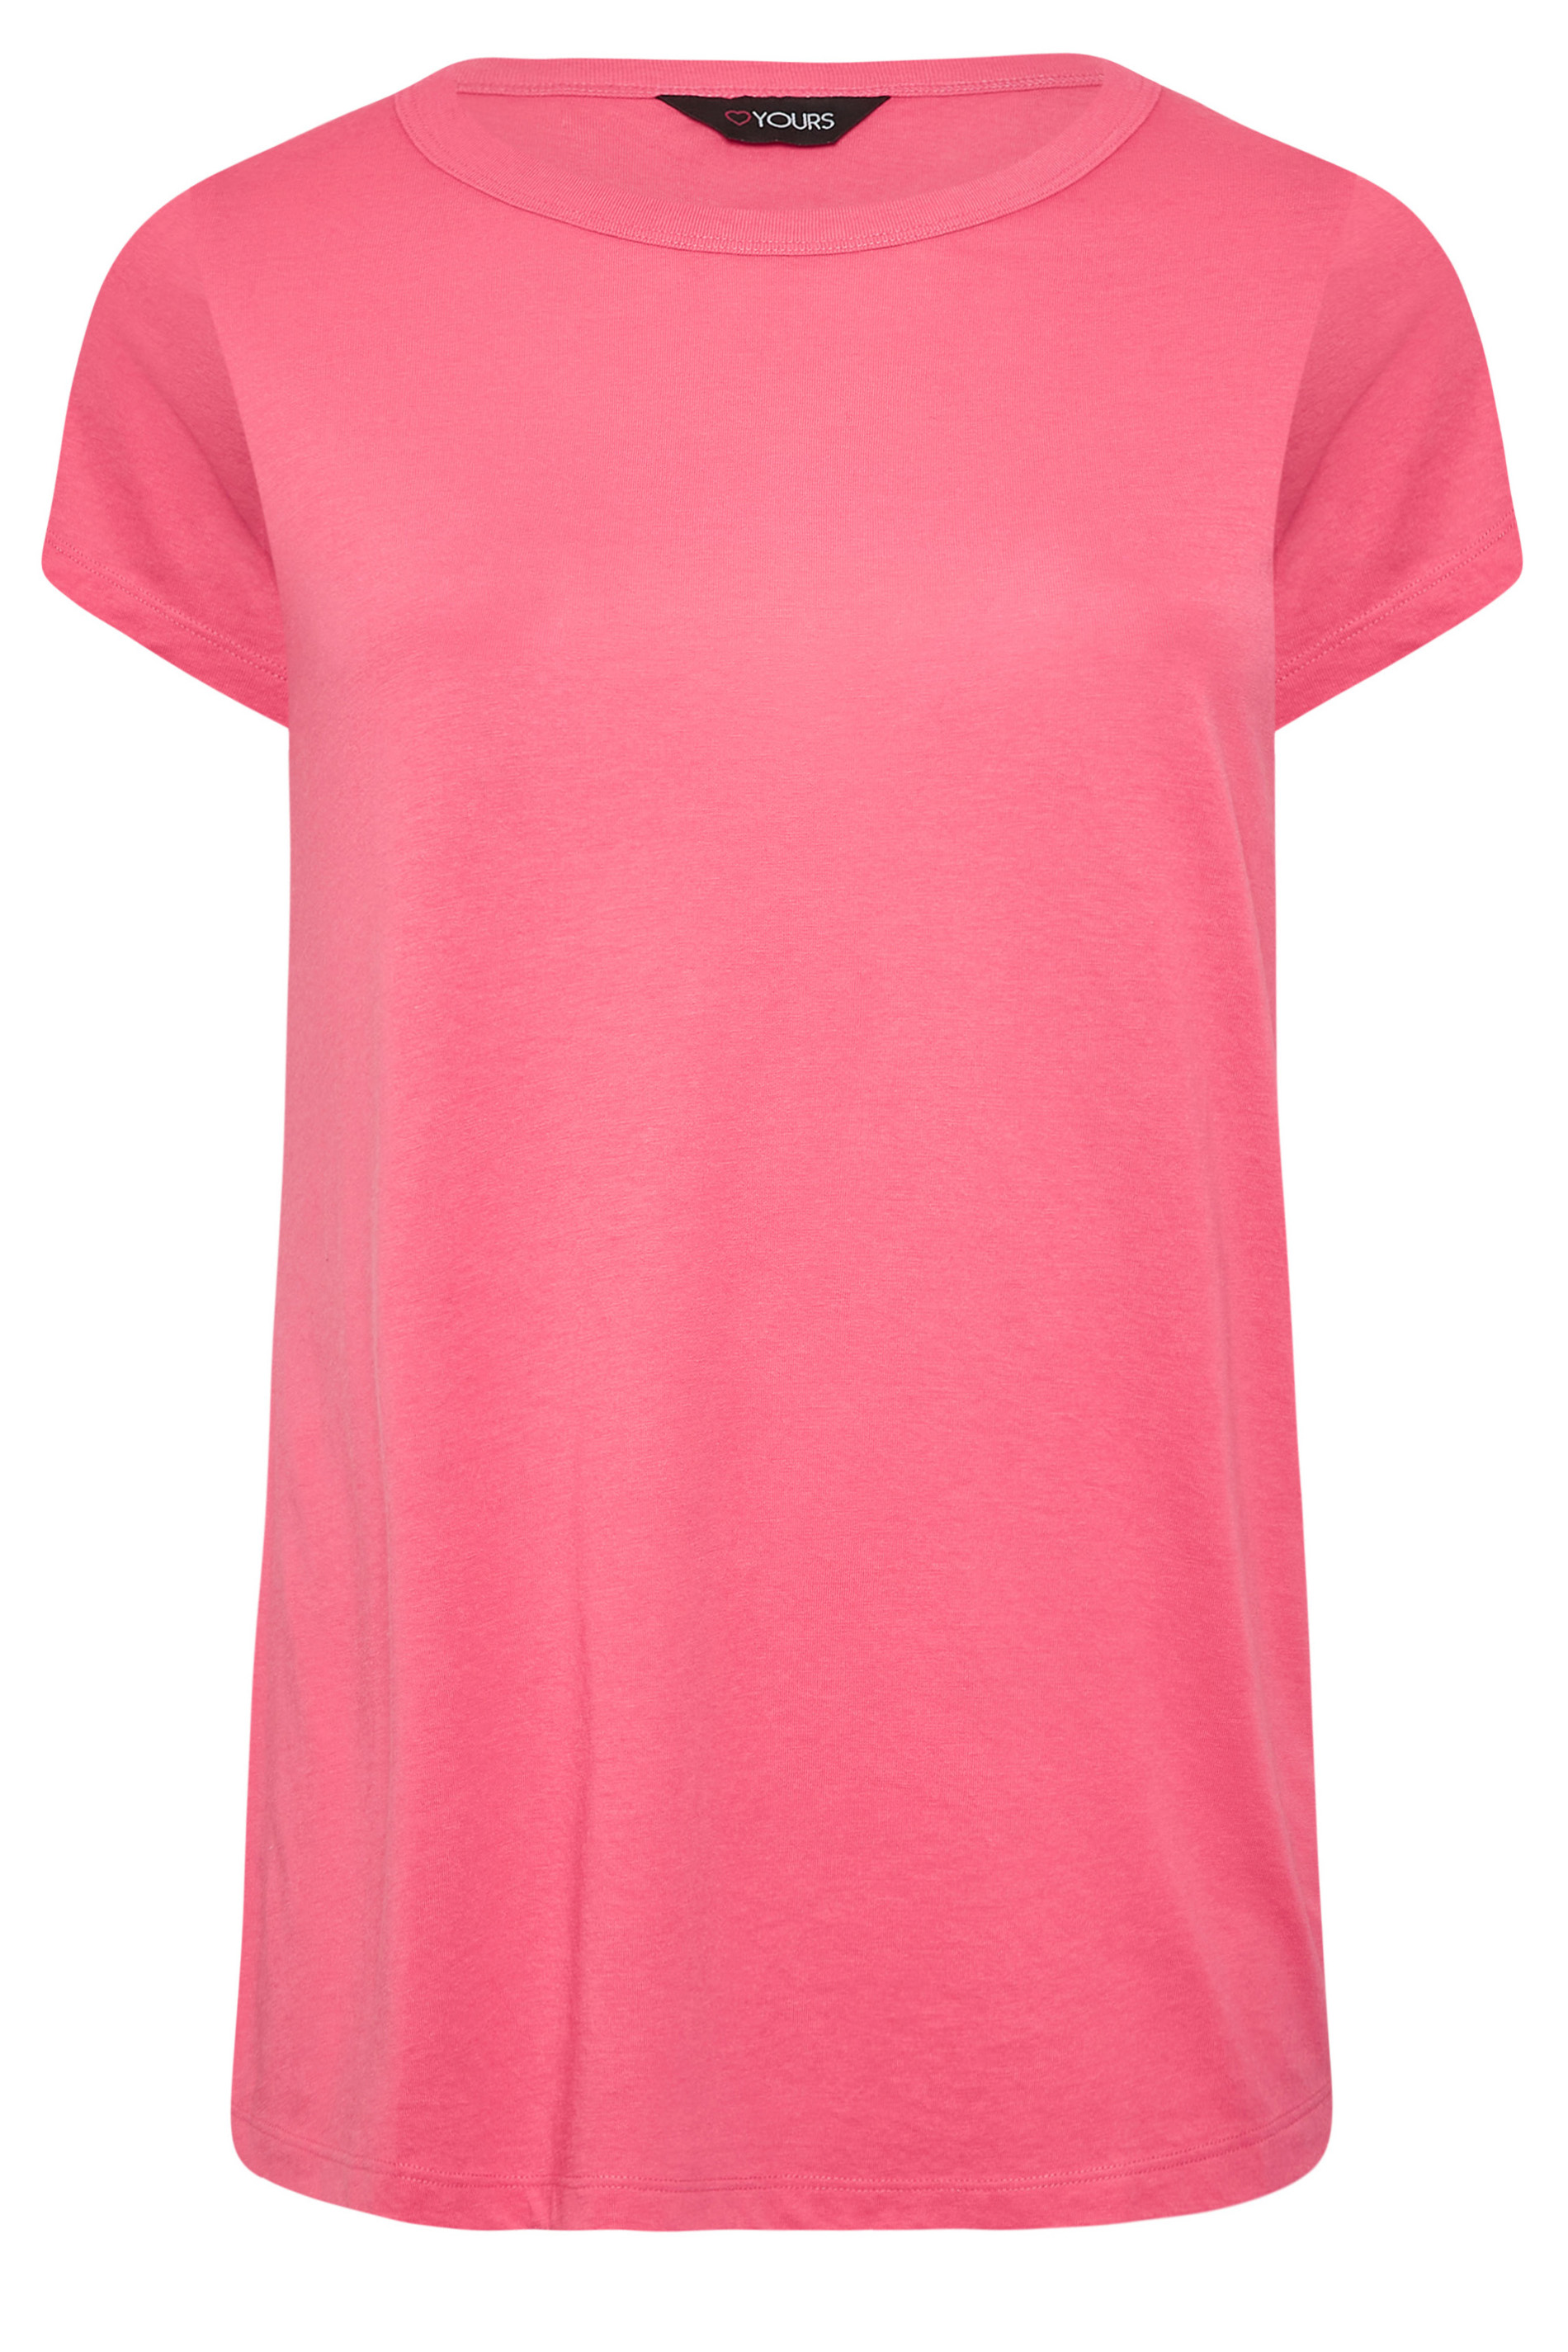 Plus Size Bright Pink Essential Short Sleeve T-Shirt | Yours Clothing